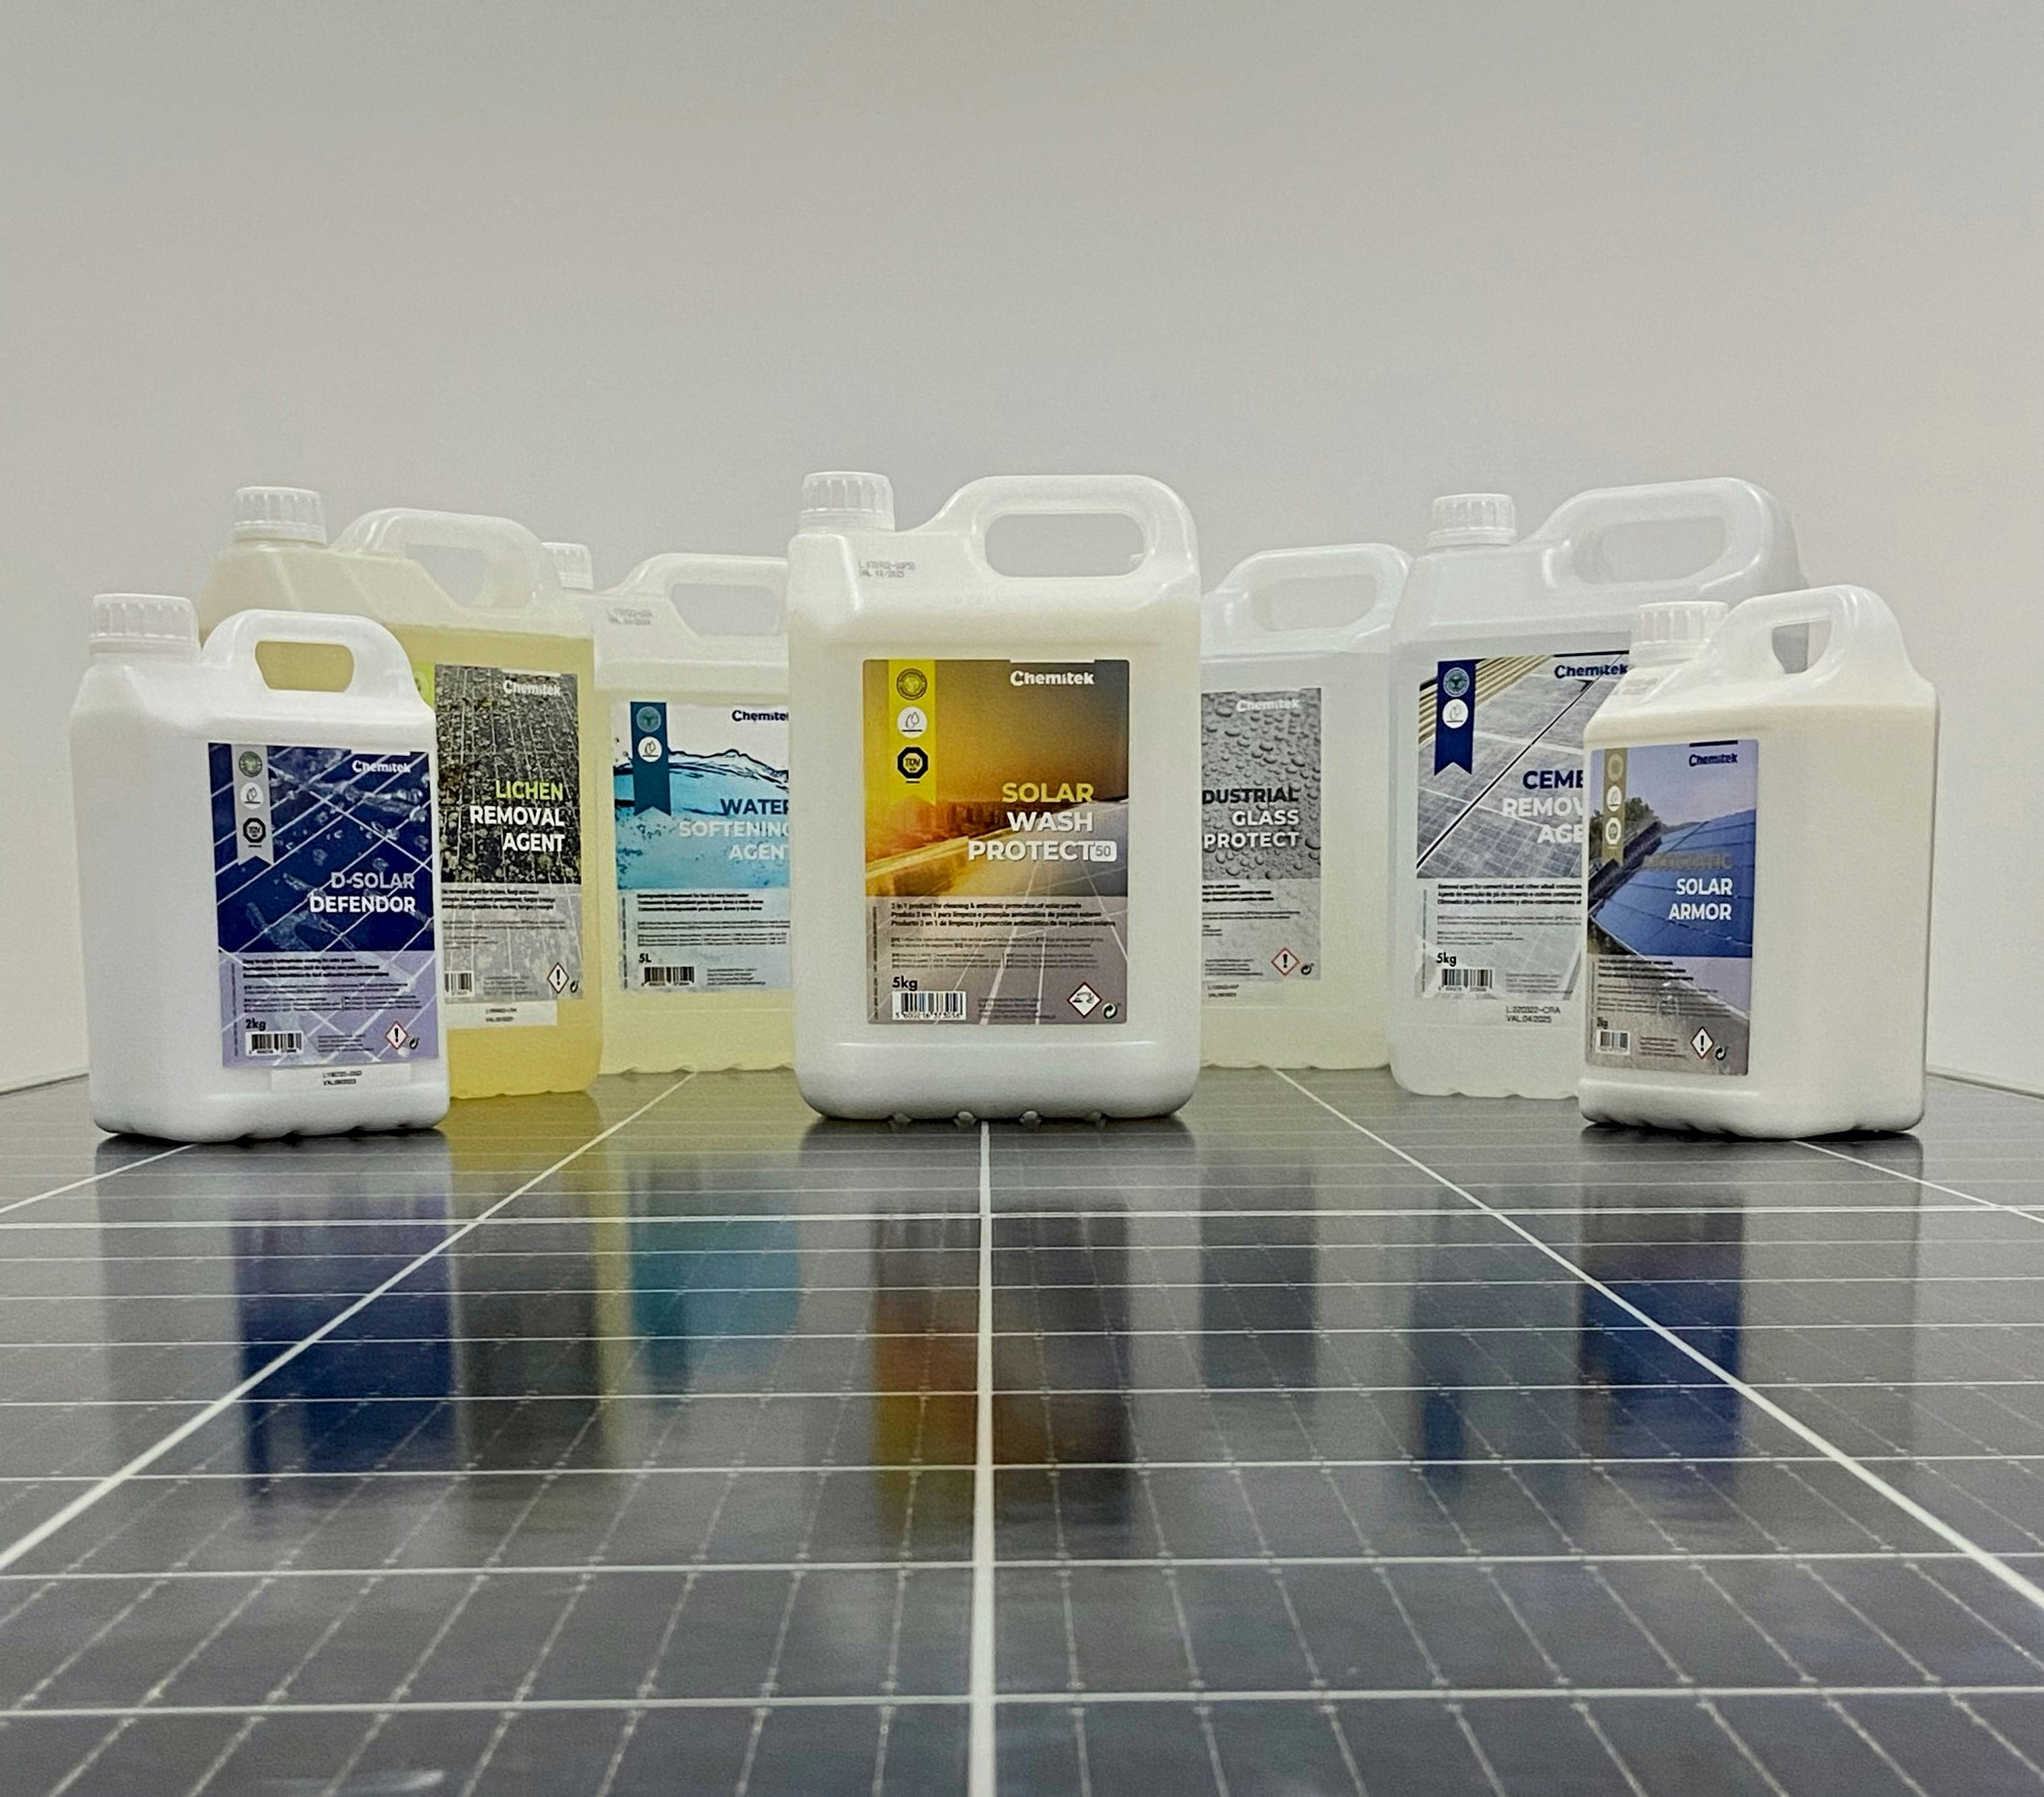 ChemiTek's Range of Products for the Solar Industry